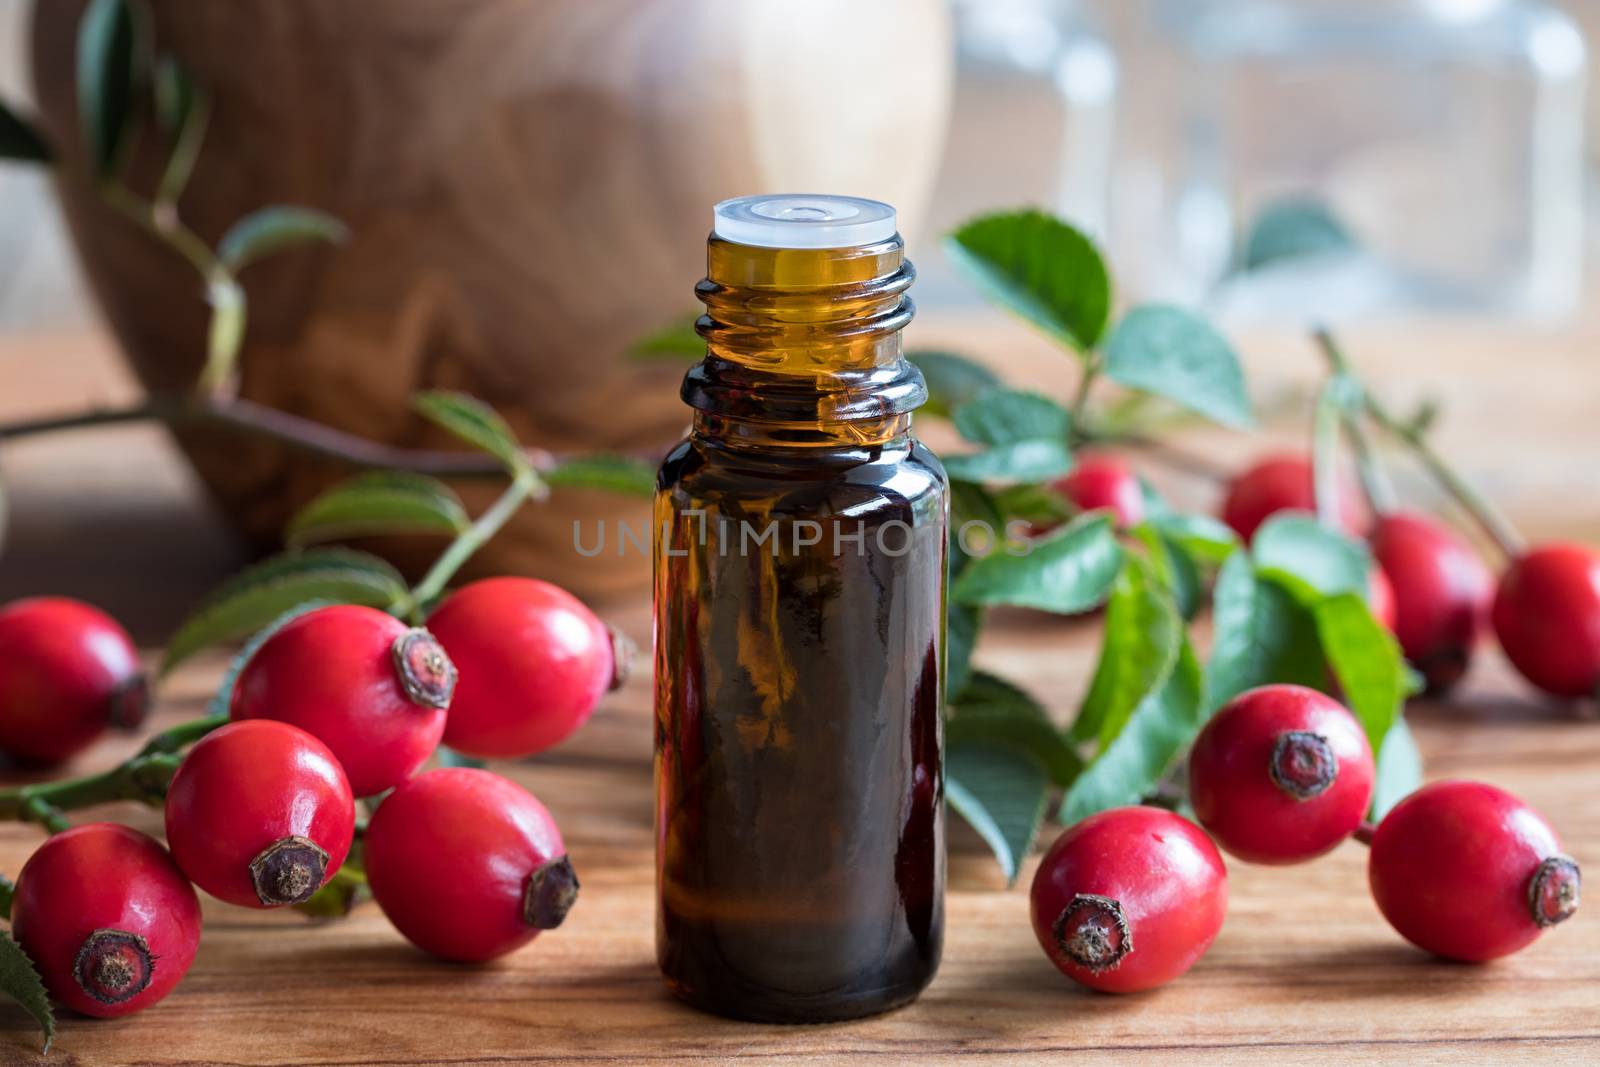 A bottle of rosehip seed oil on a wooden table, with fresh rosehips in the background